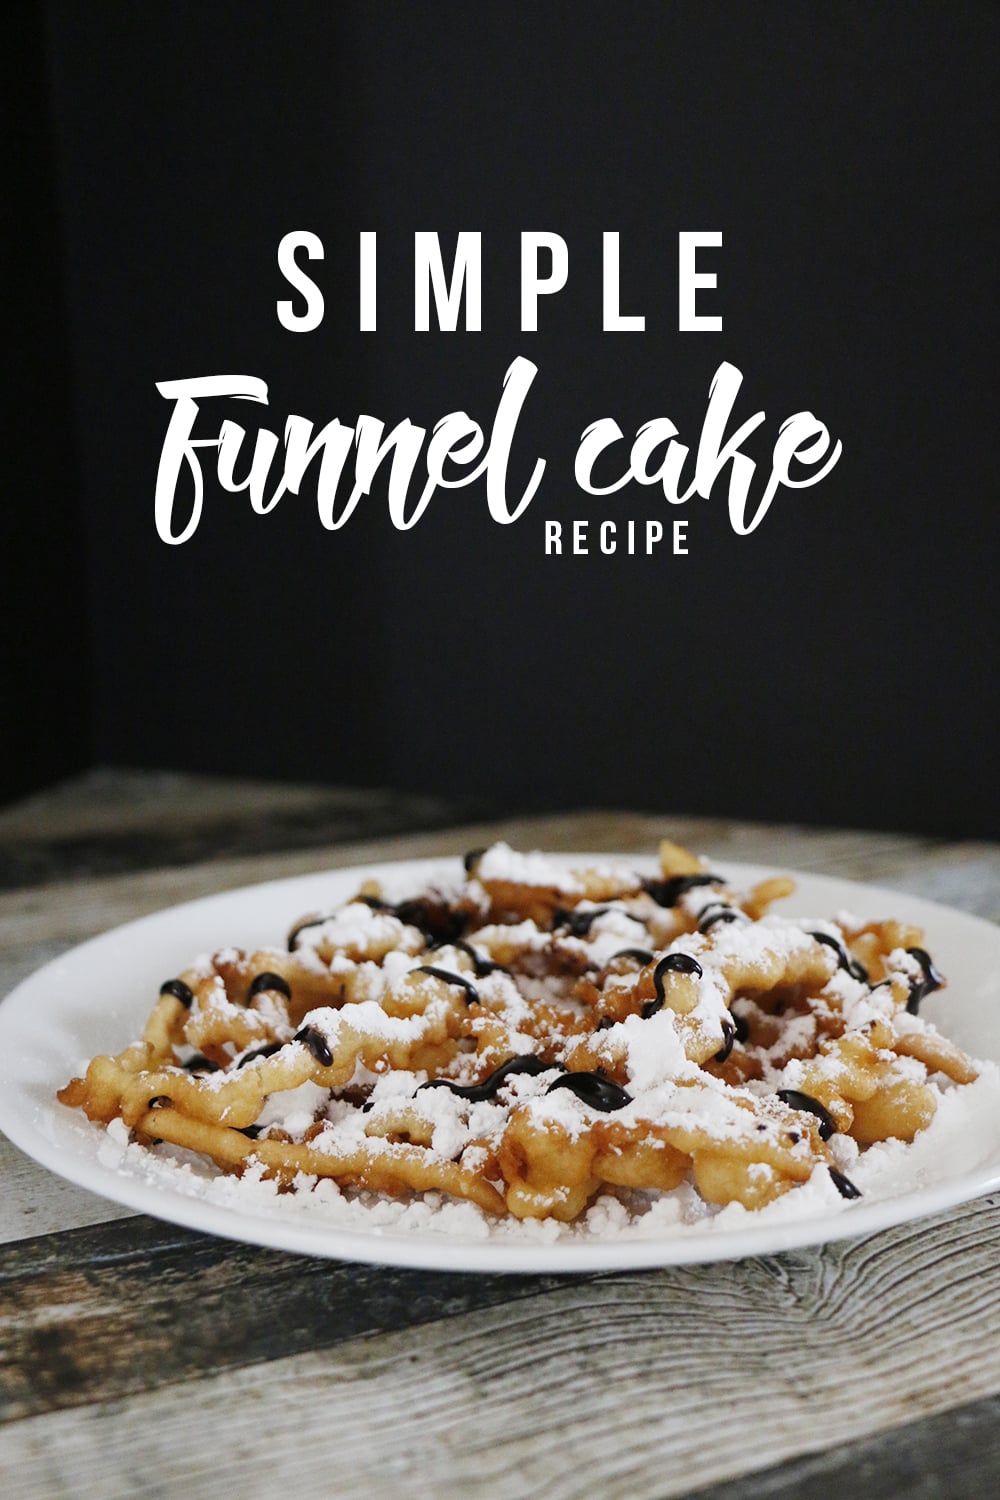 This simple funnel cake recipe will make sure that you never miss carnival funnel cakes! You'll feel like you were at the fair every time you make these!